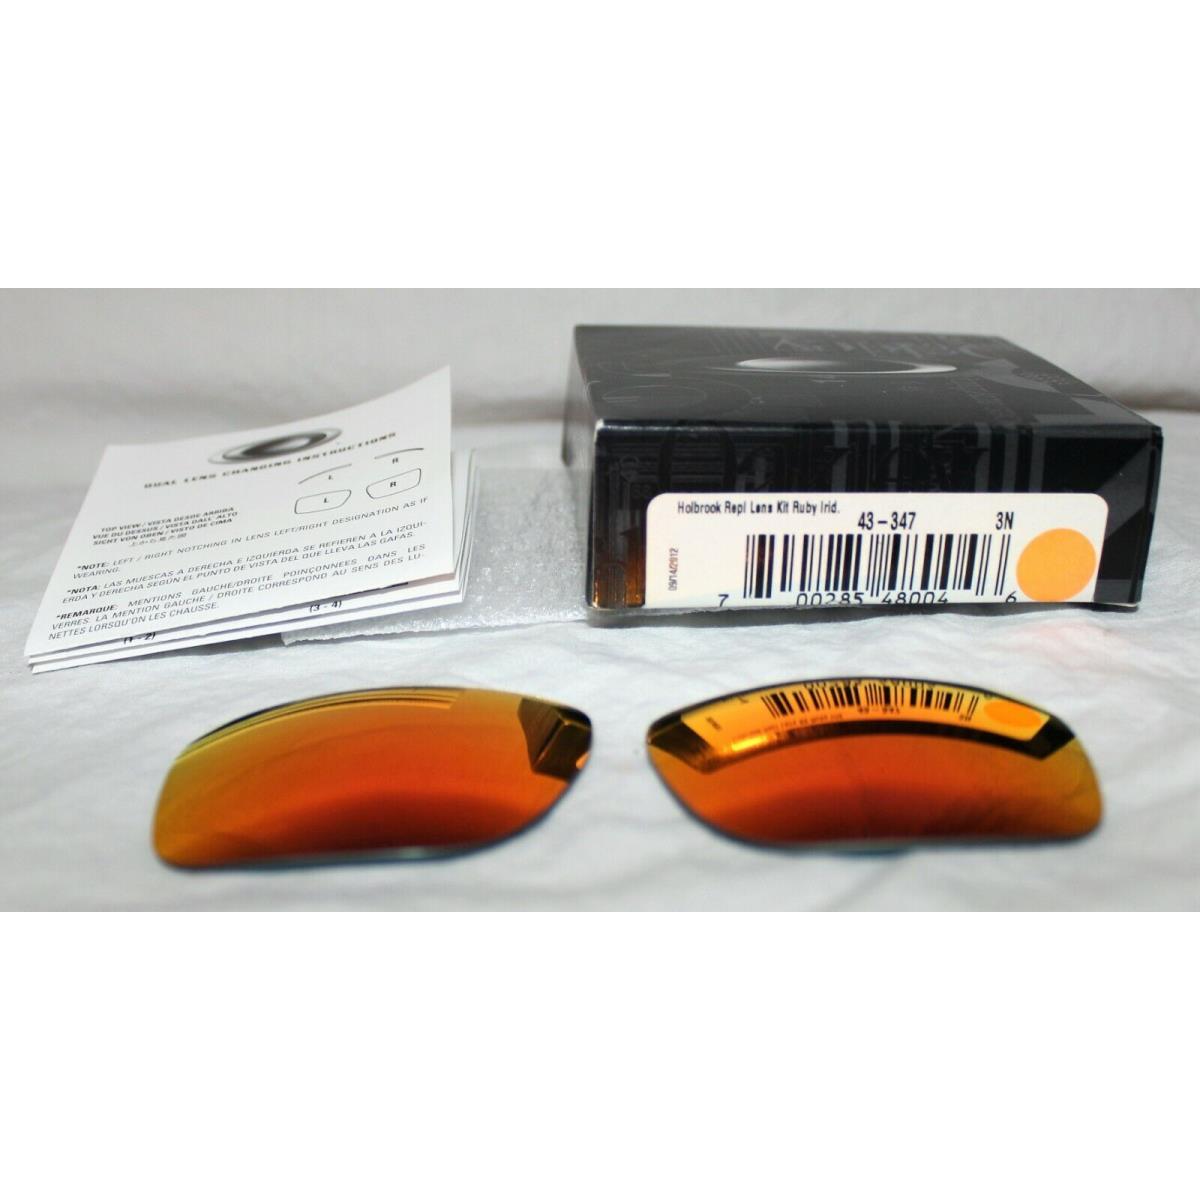 Oakley Holbrook Lens Ruby Irid. Replacement Oem 43-347